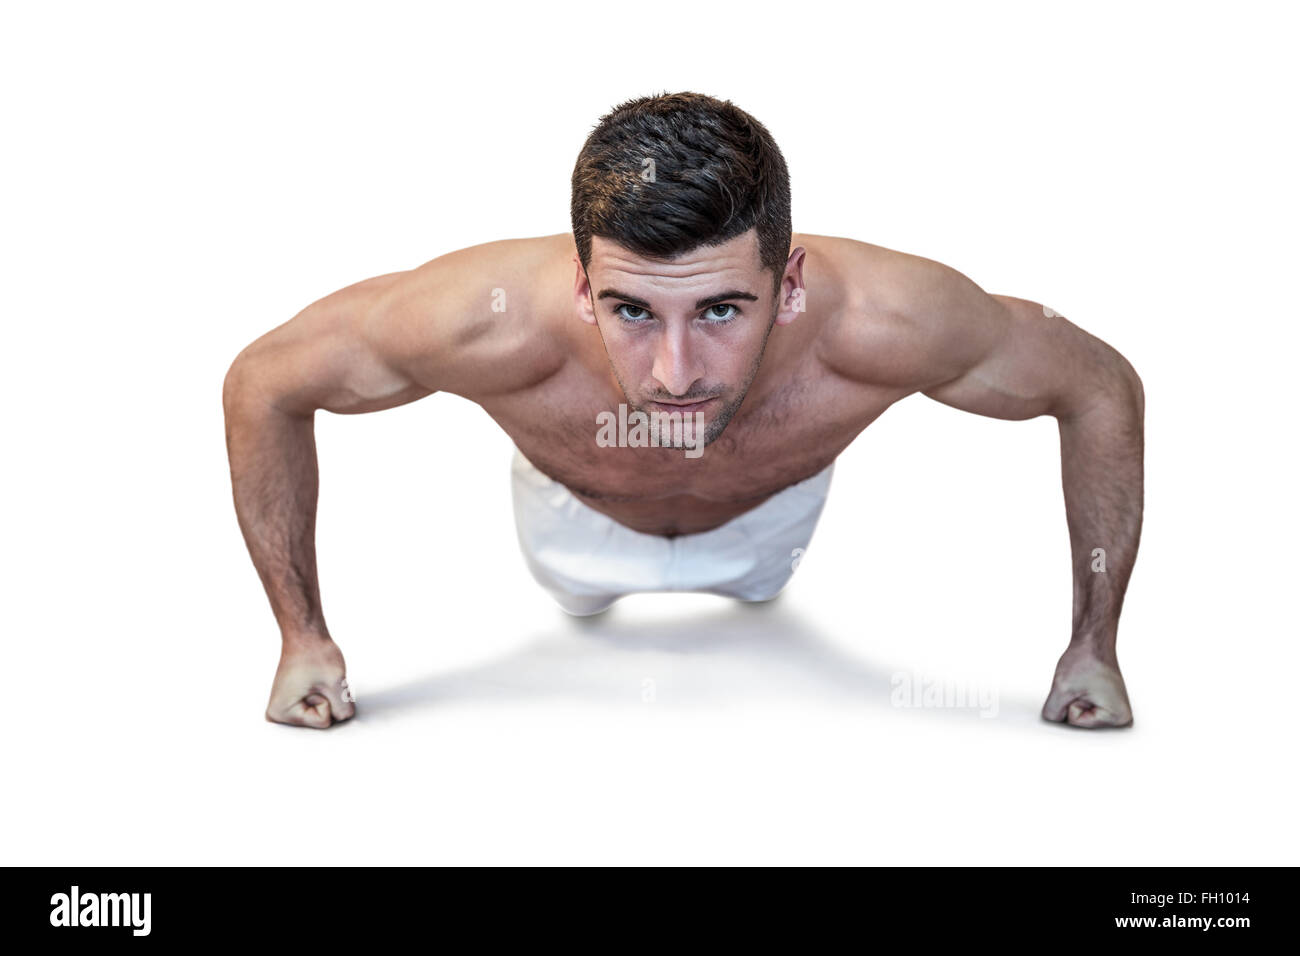 Man doing push up with clenched fist Stock Photo